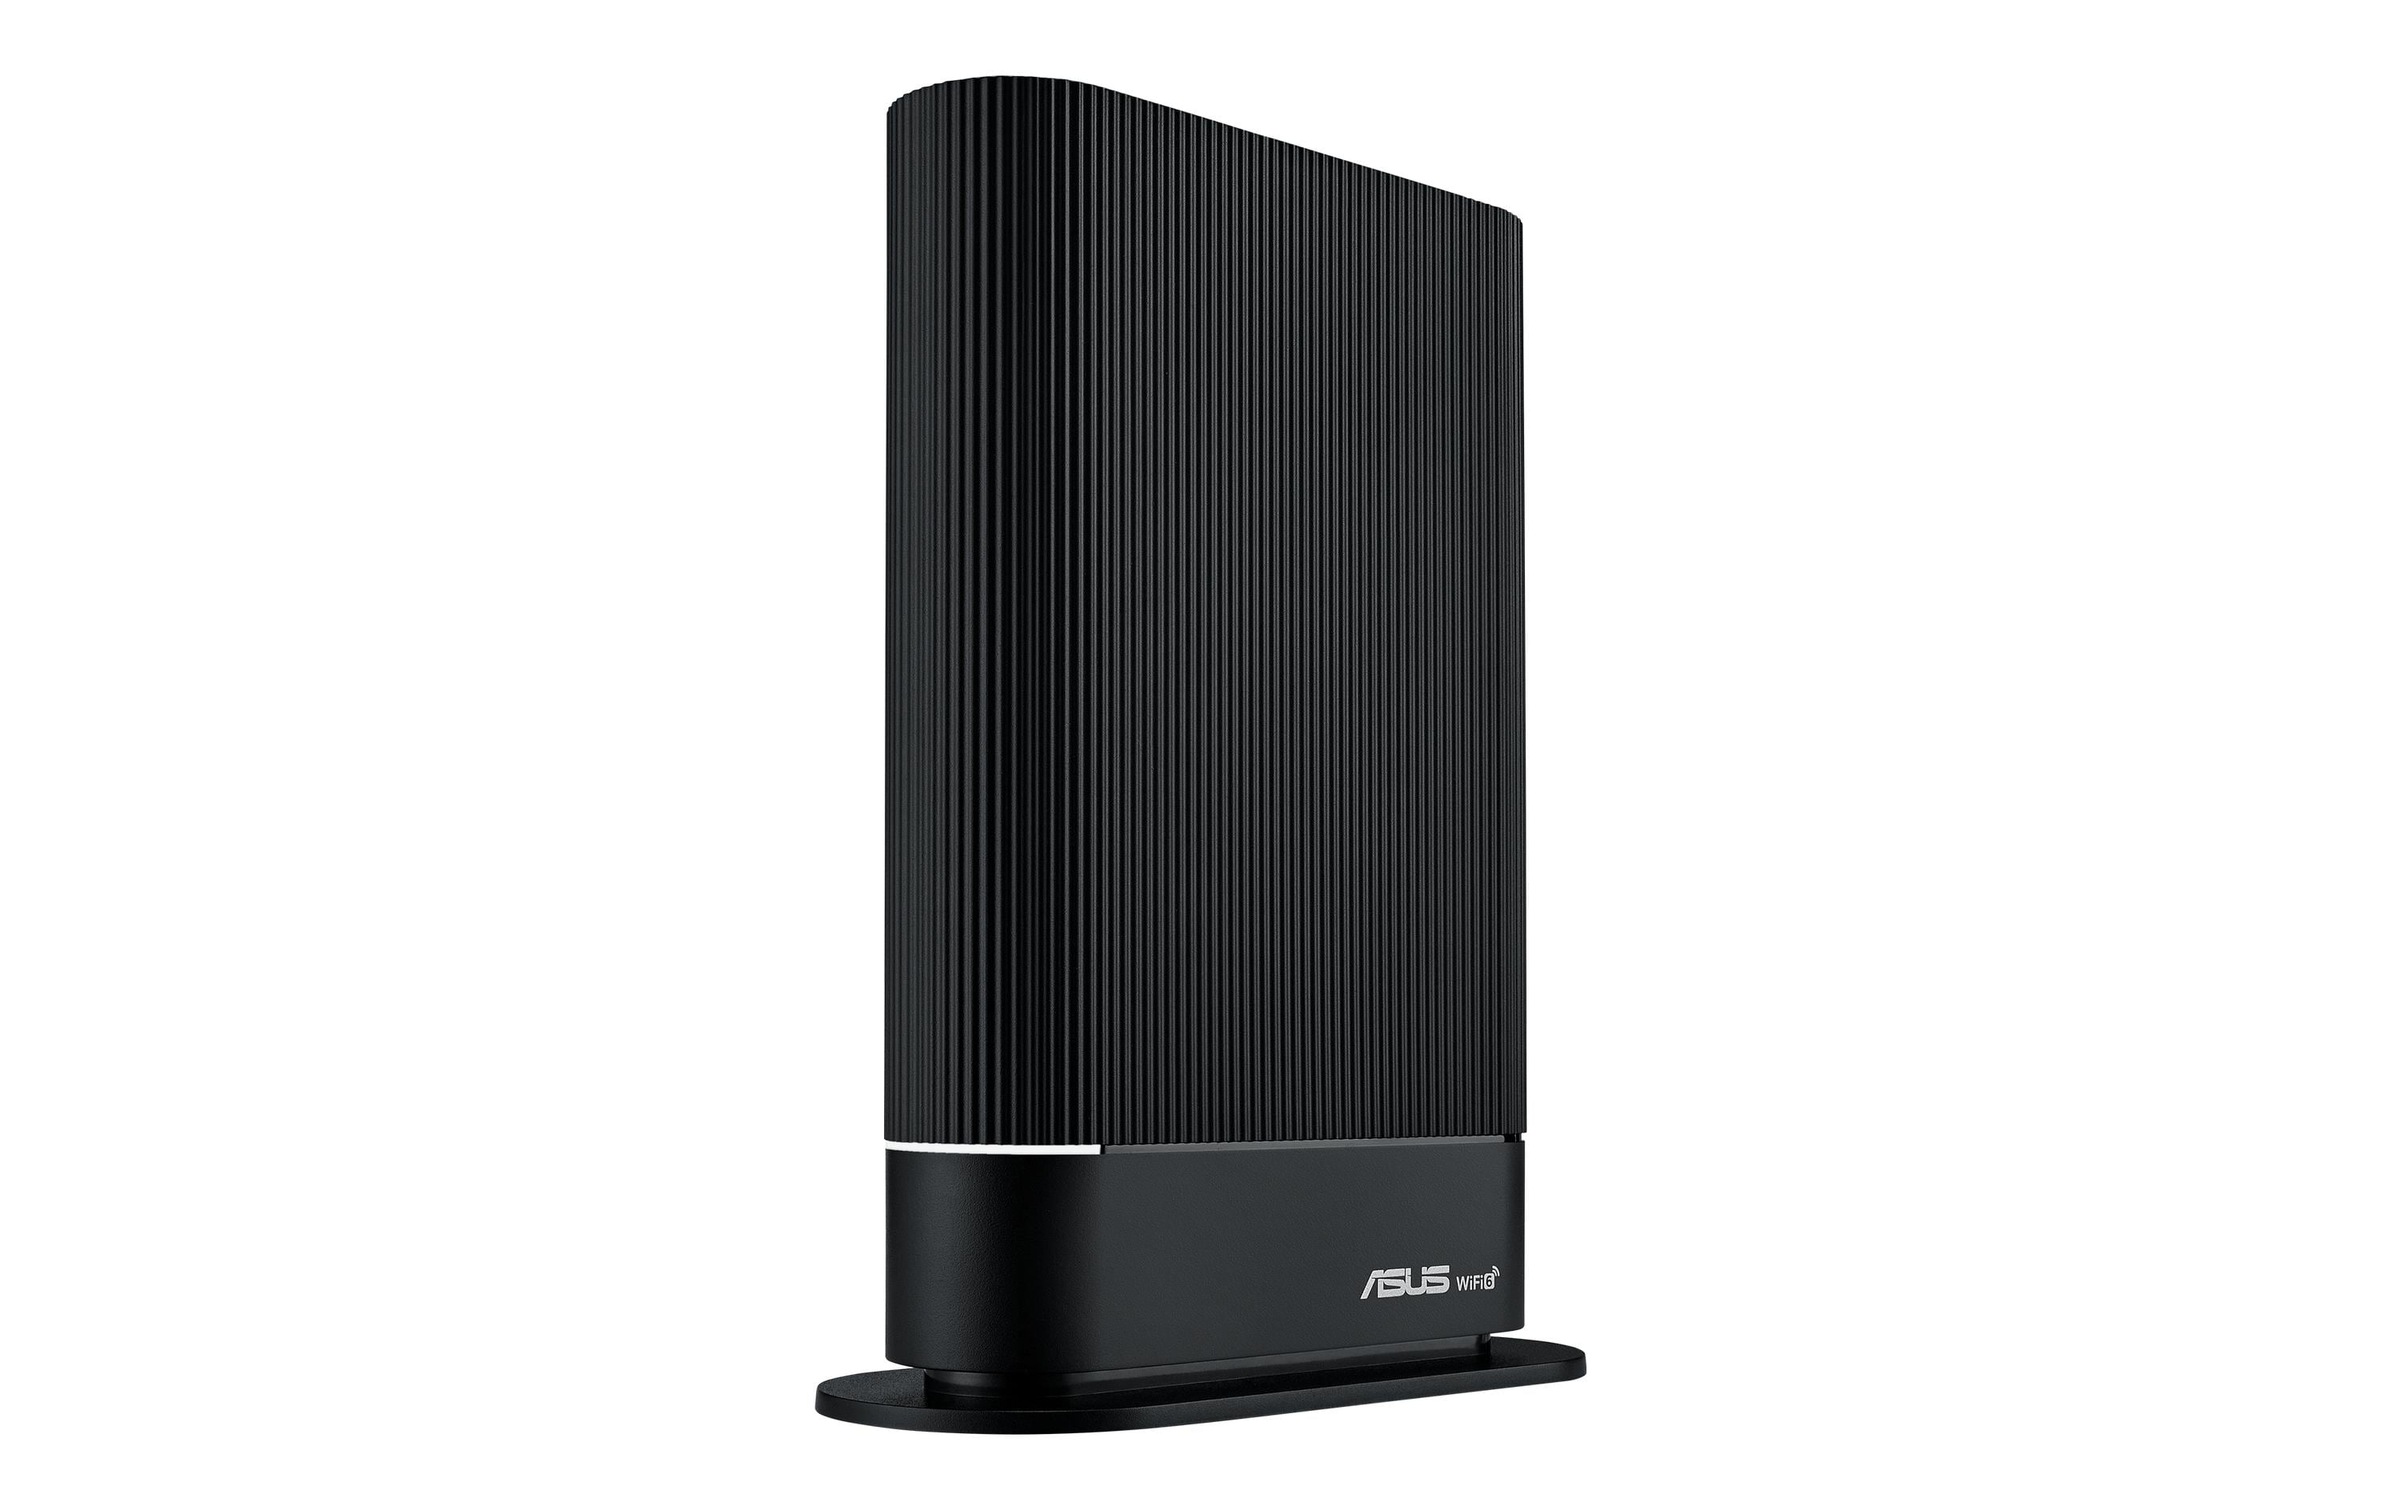 Asus WLAN-Router »WiFi Router RT-AX59U«